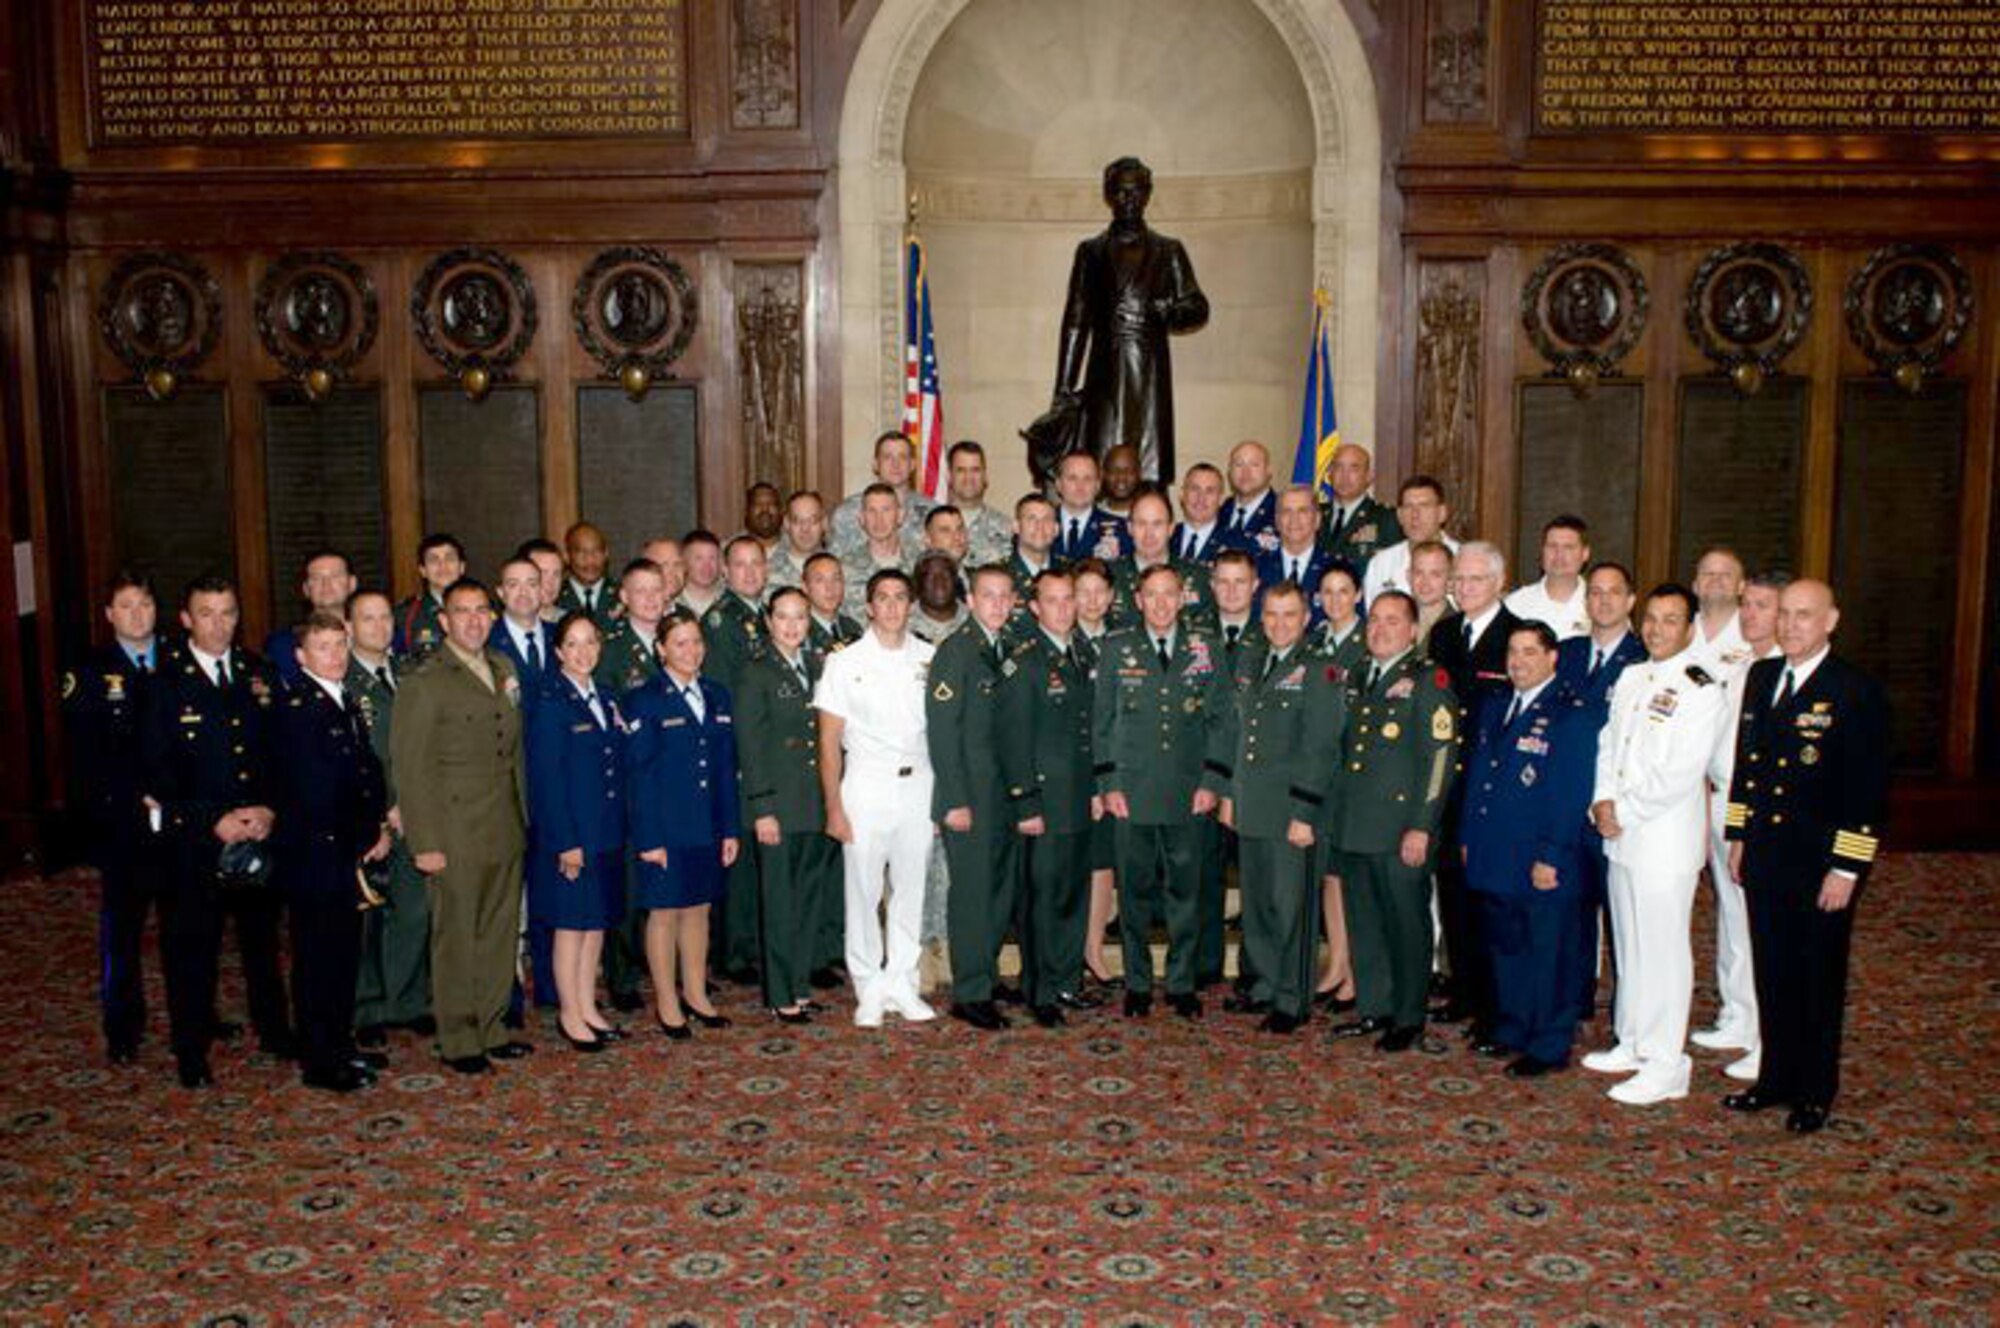 General David Petraeus, Central Command commander, celebrated Flag Day with The Adjutant General for Pennsylvania, Major General Jessica Wright, various members of the 111th FW and members of the Philadelphia Union League June 14. The Union League is a group of the Philadelphia region's leaders in business, education, religion, and the arts and culture.